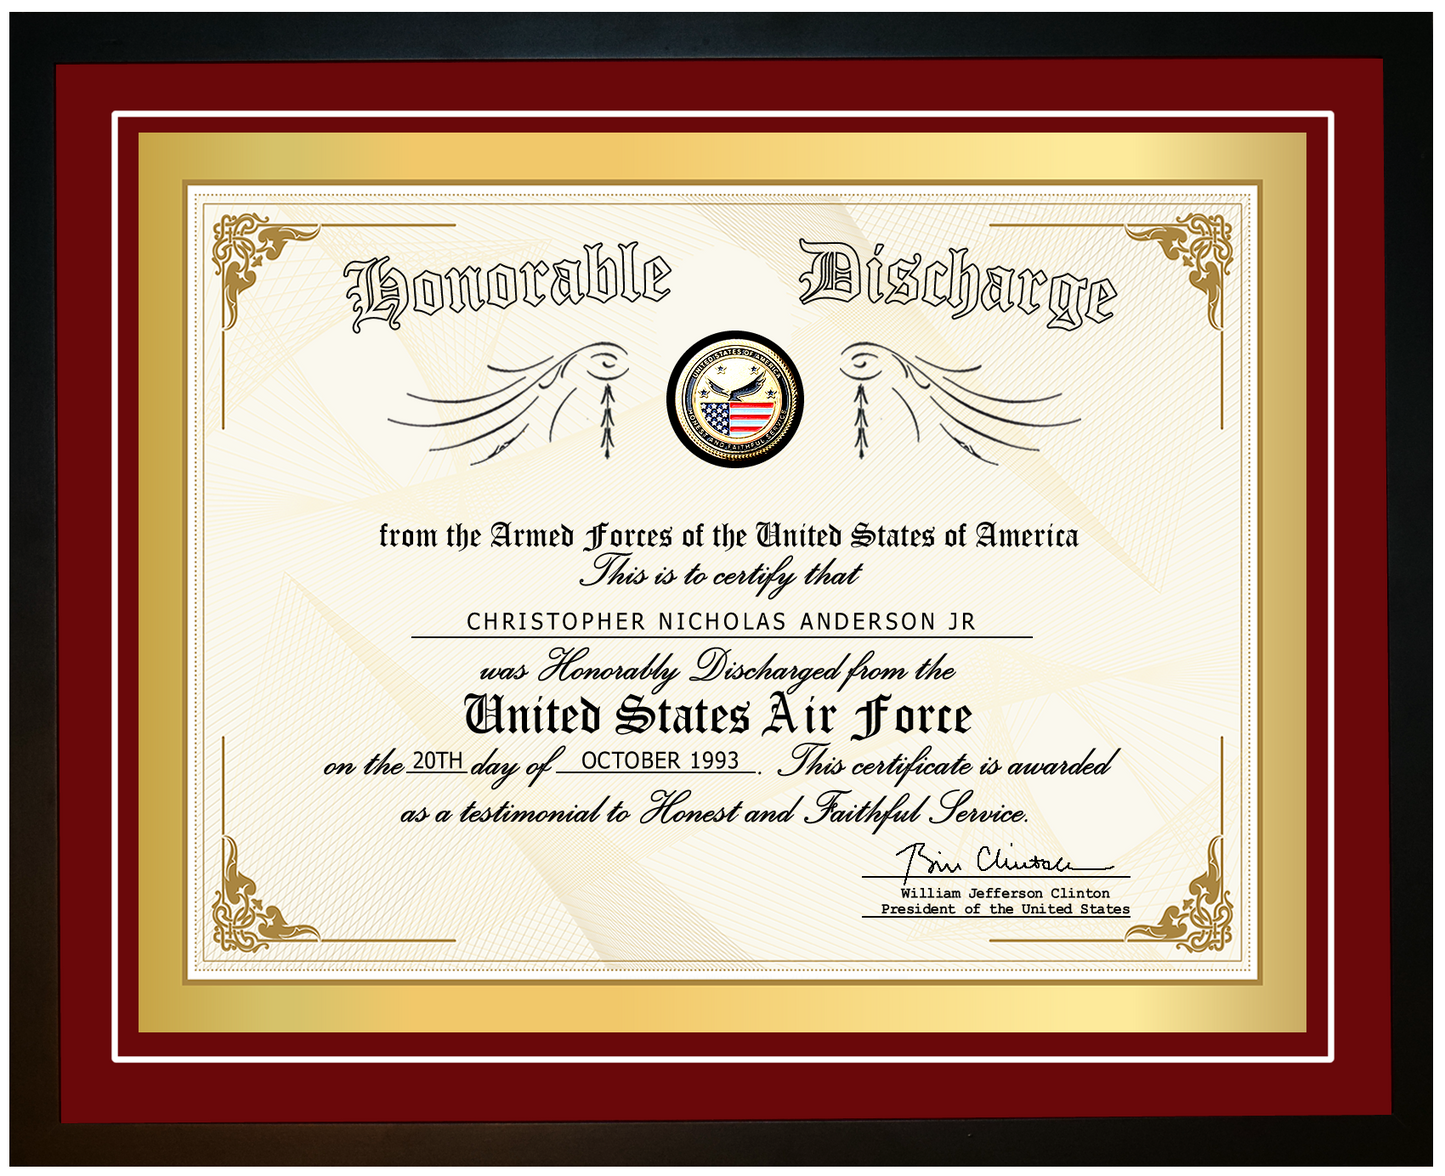 United States Air Force (USAF) Honorable Discharge Certificate